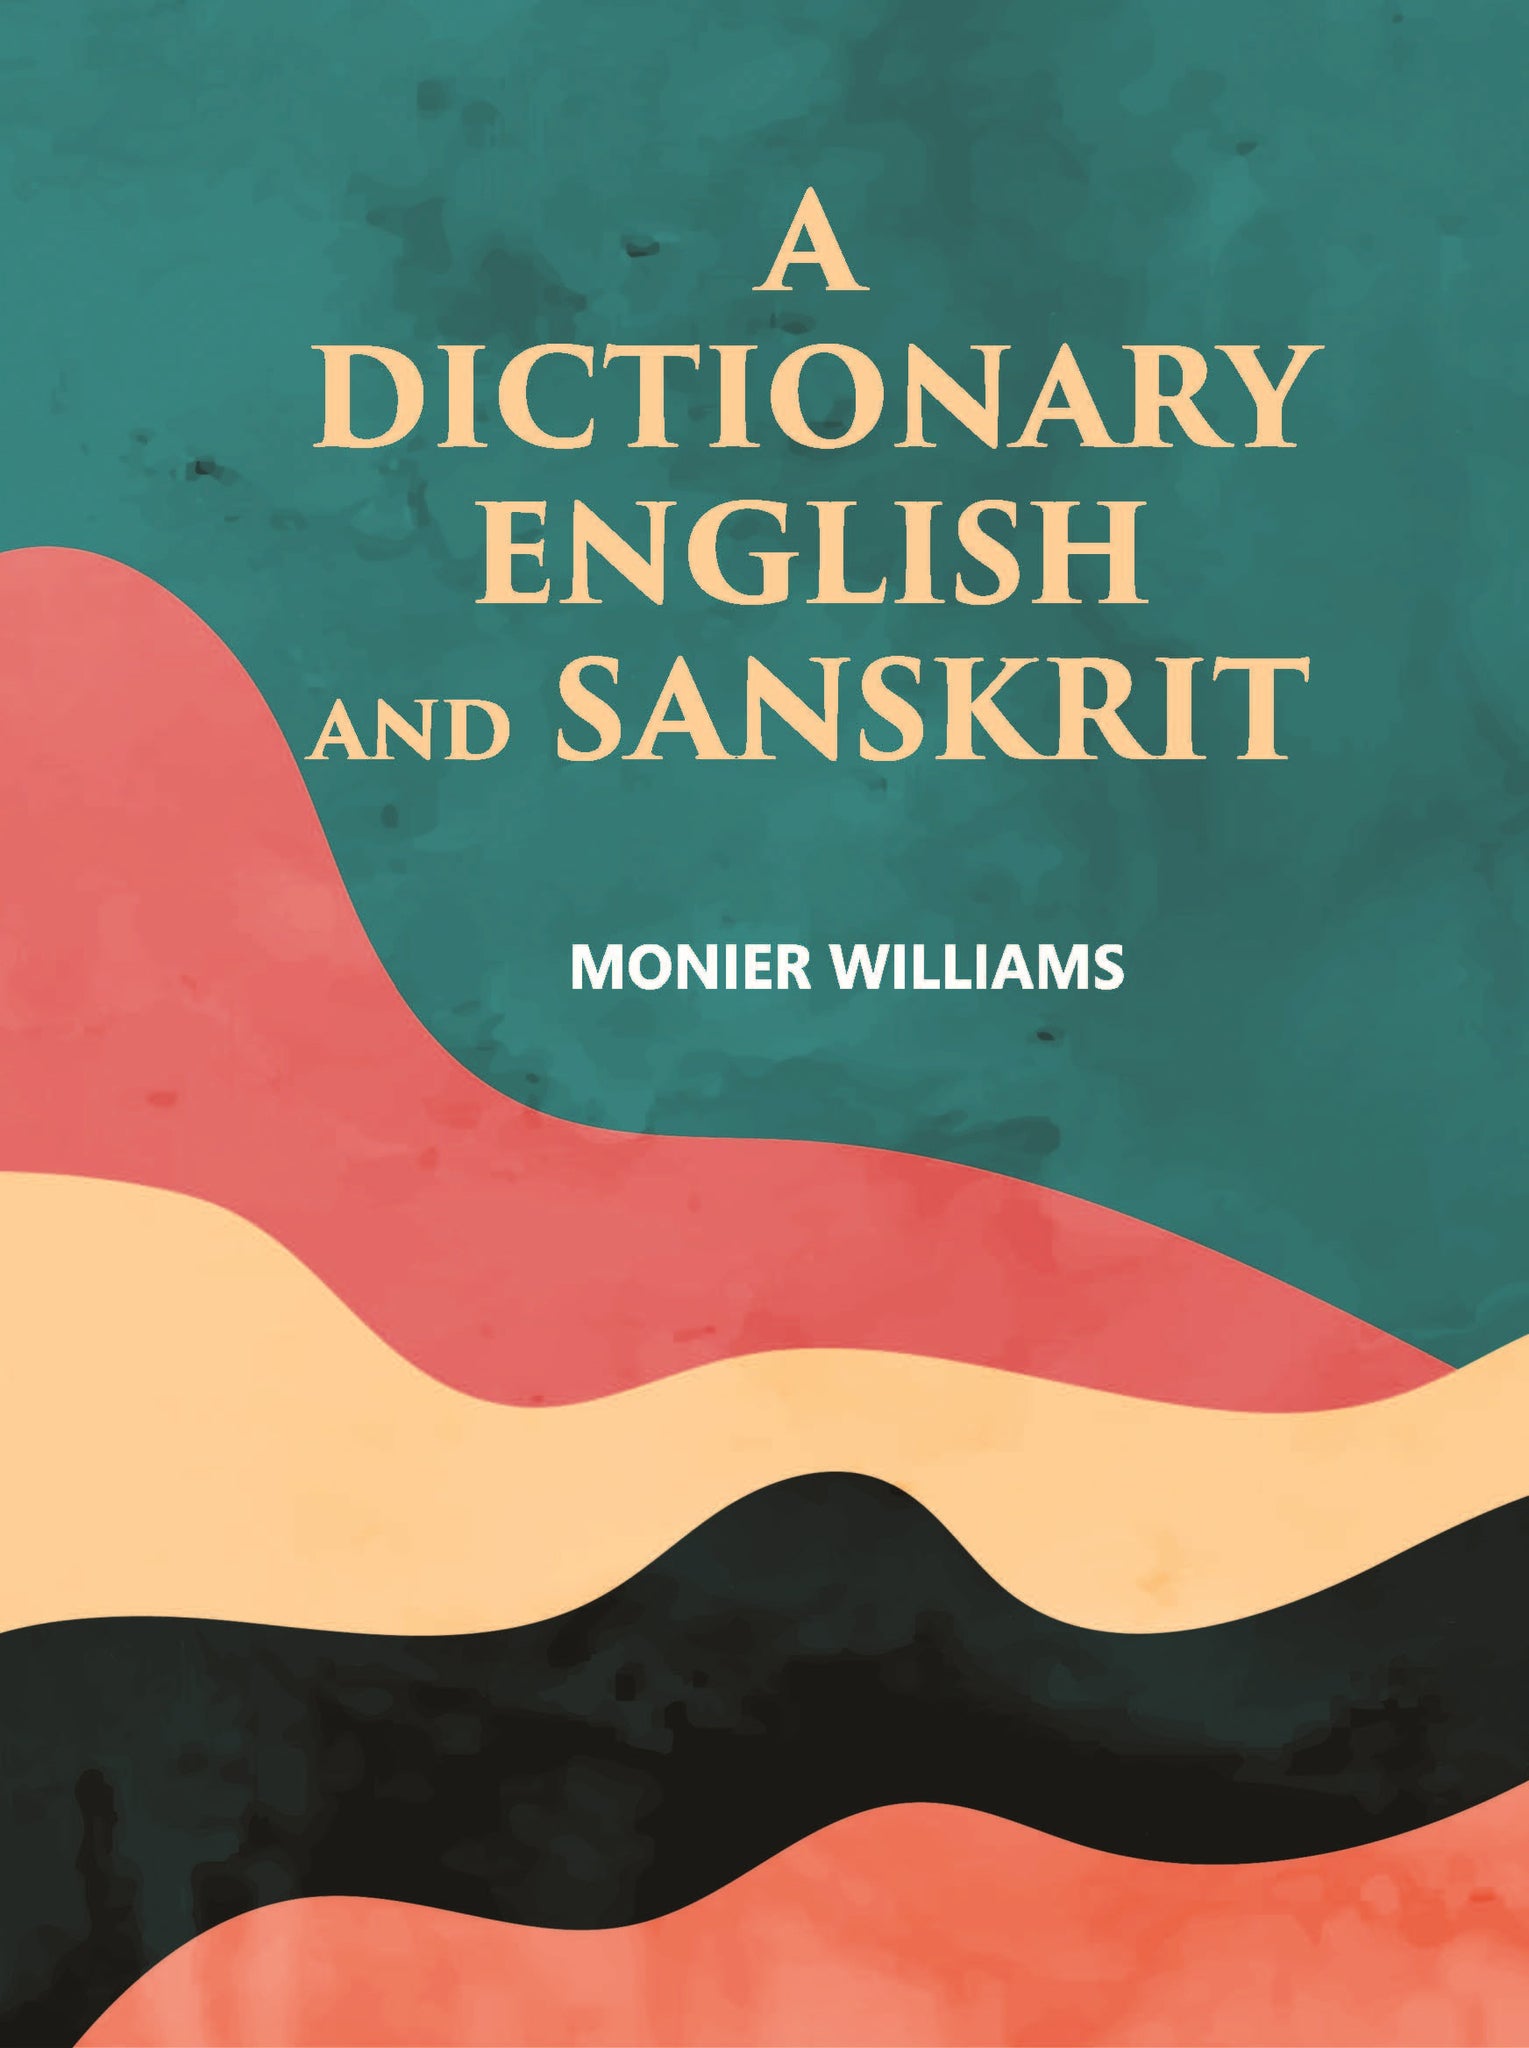 A Dictionary English And Sanskrit